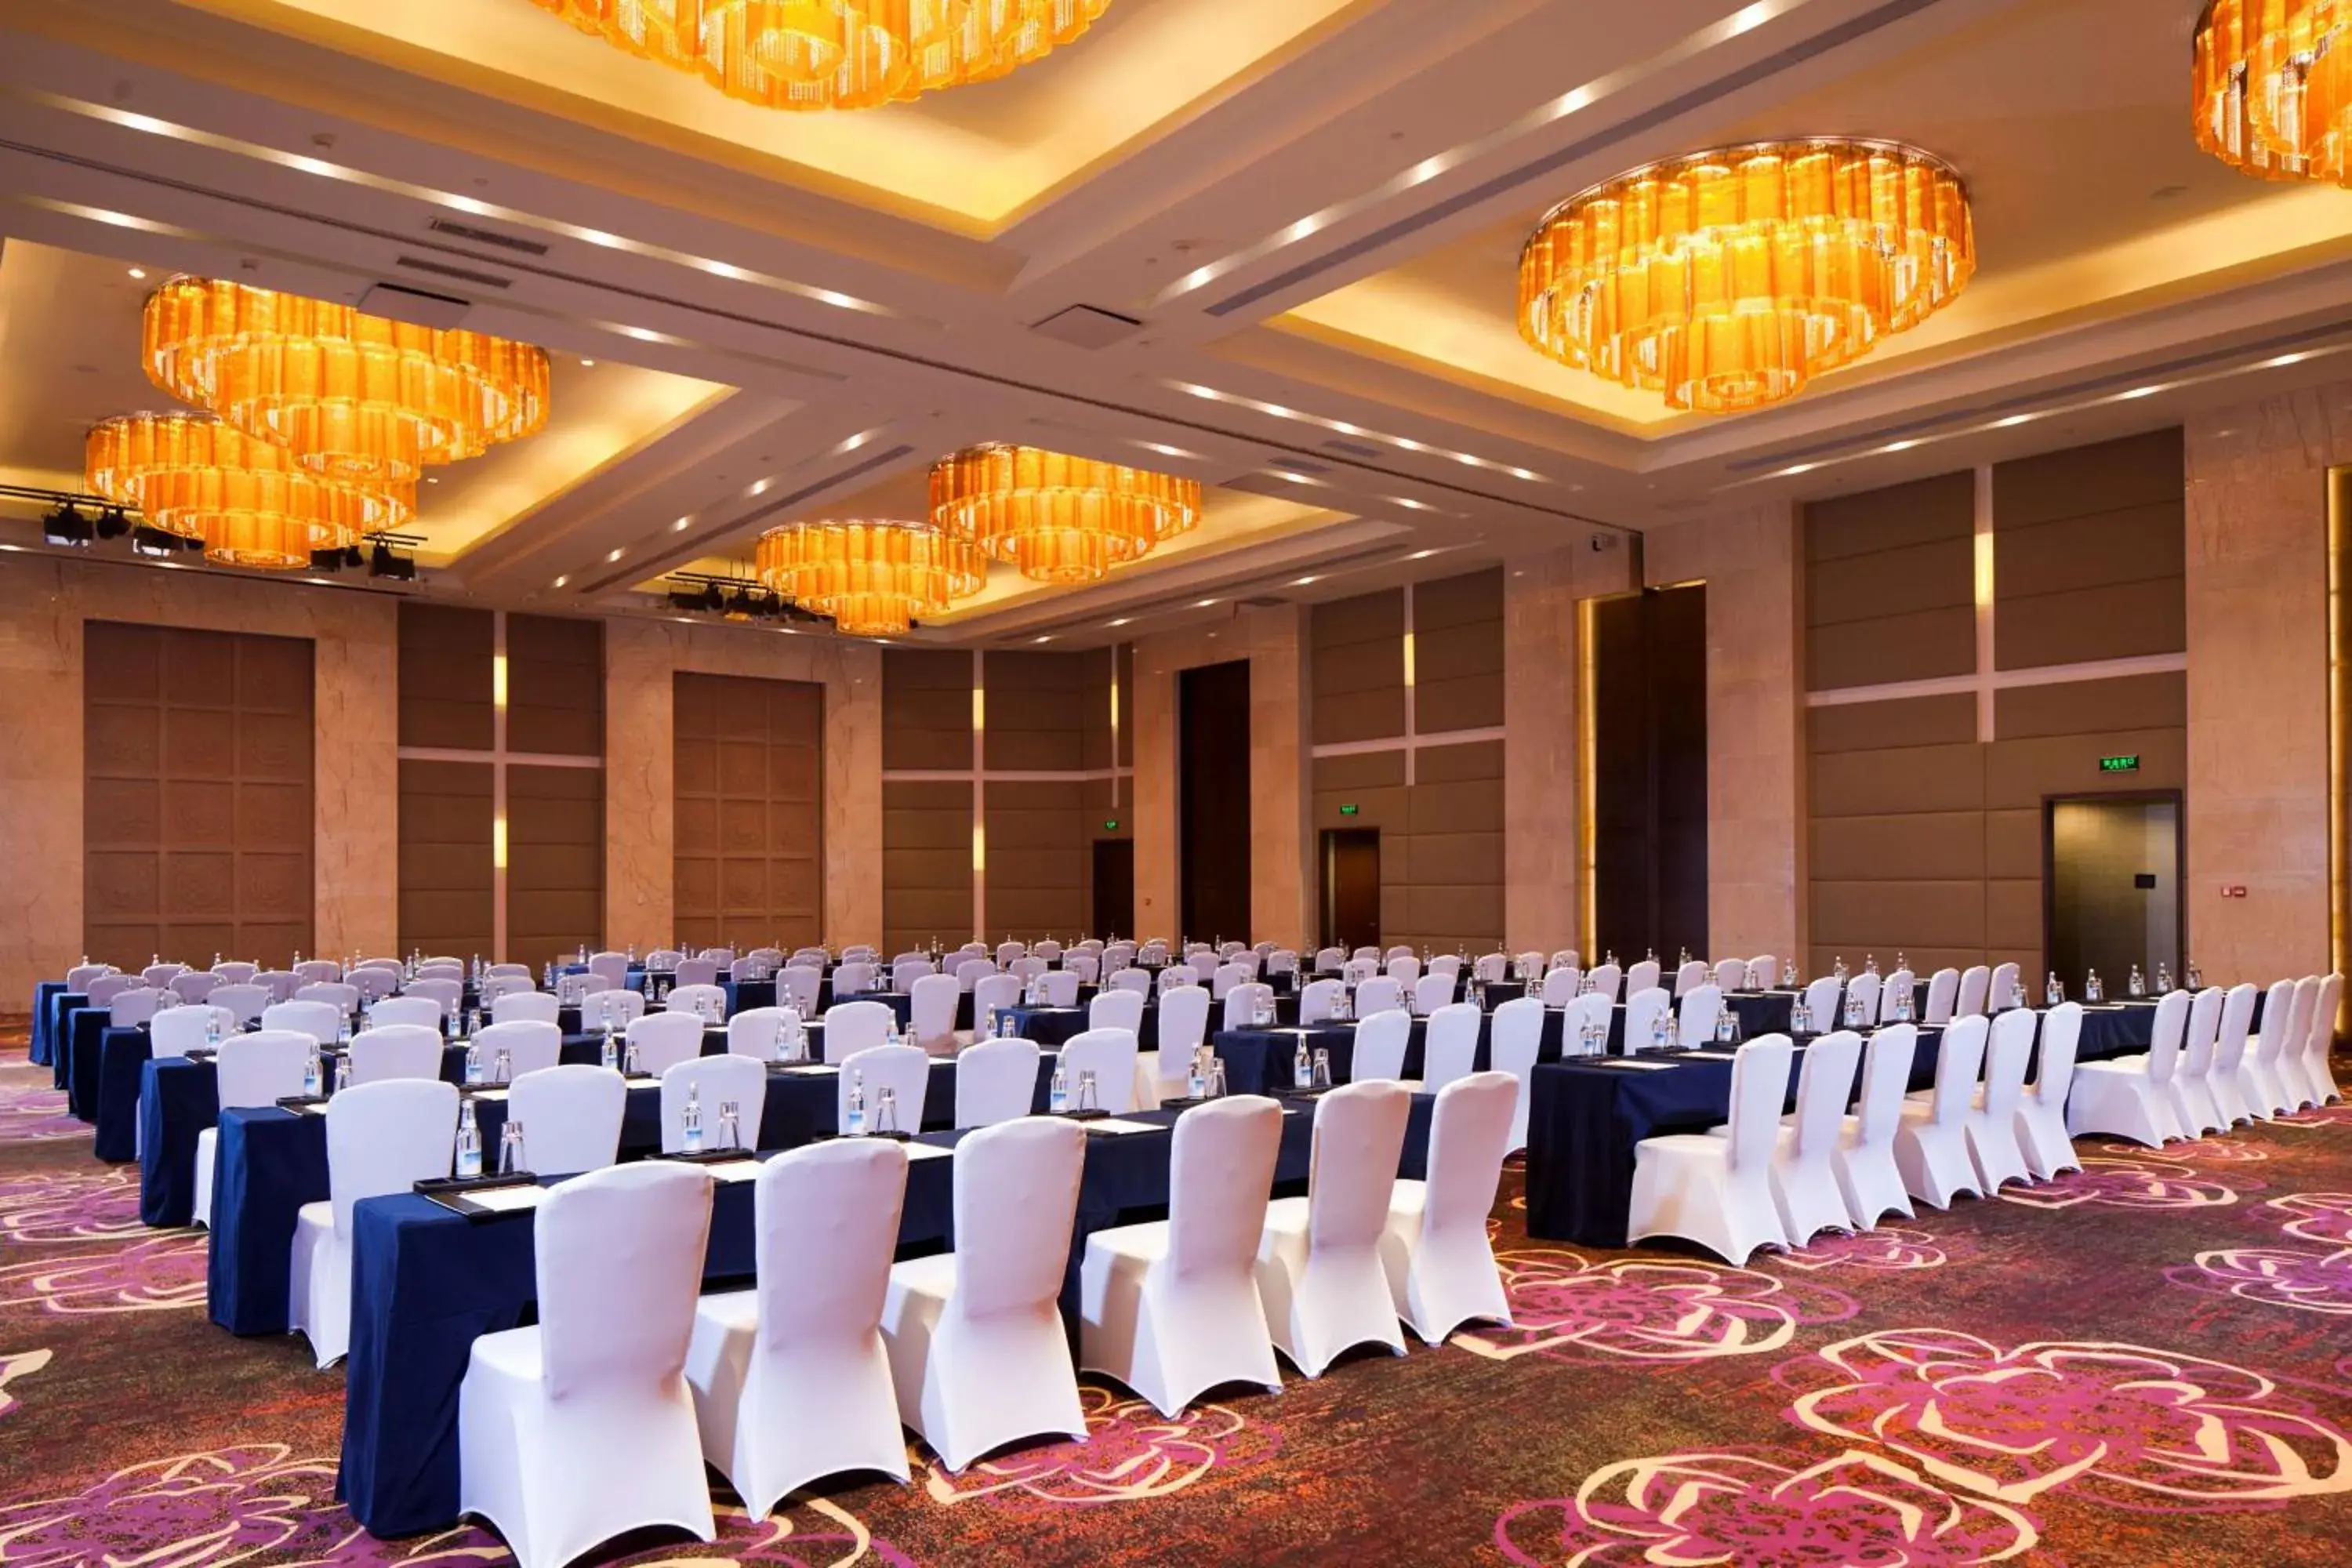 Meeting/conference room, Banquet Facilities in DoubleTree By Hilton Shenyang Hotel